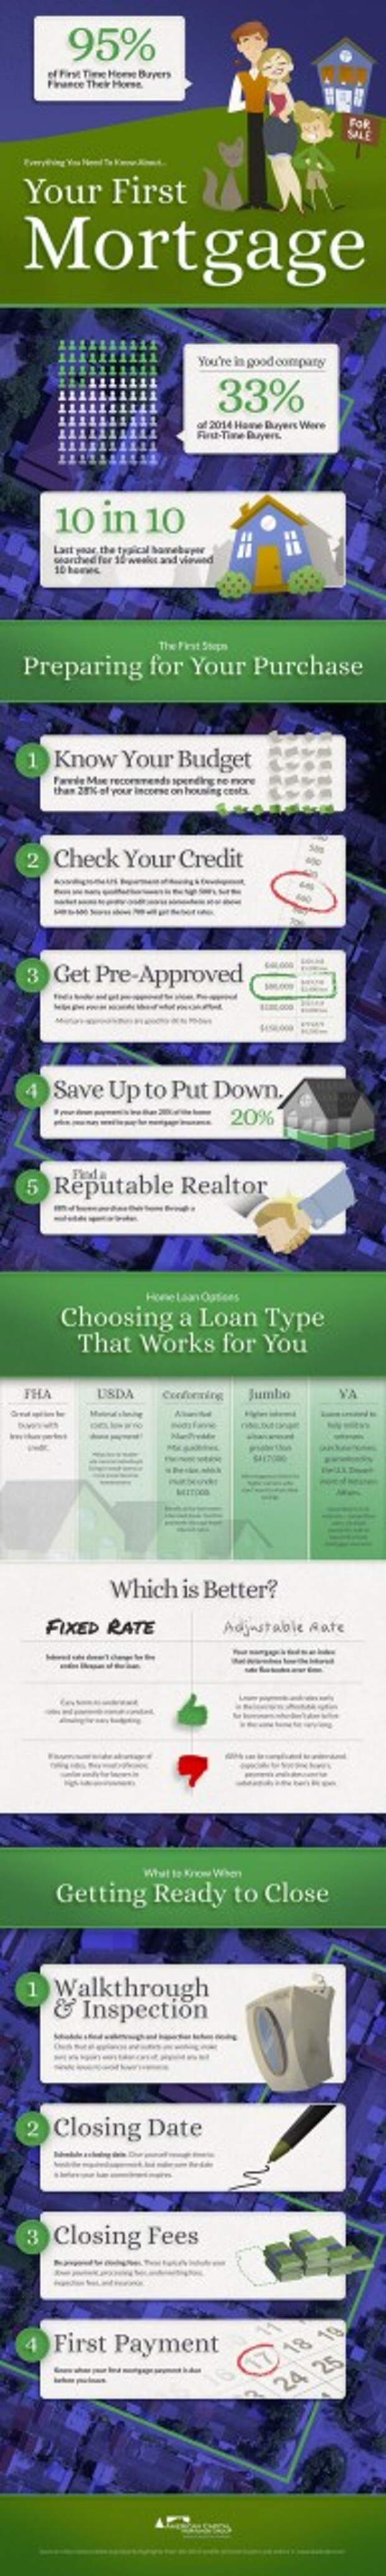 Your First Mortgage, What You Need To Know